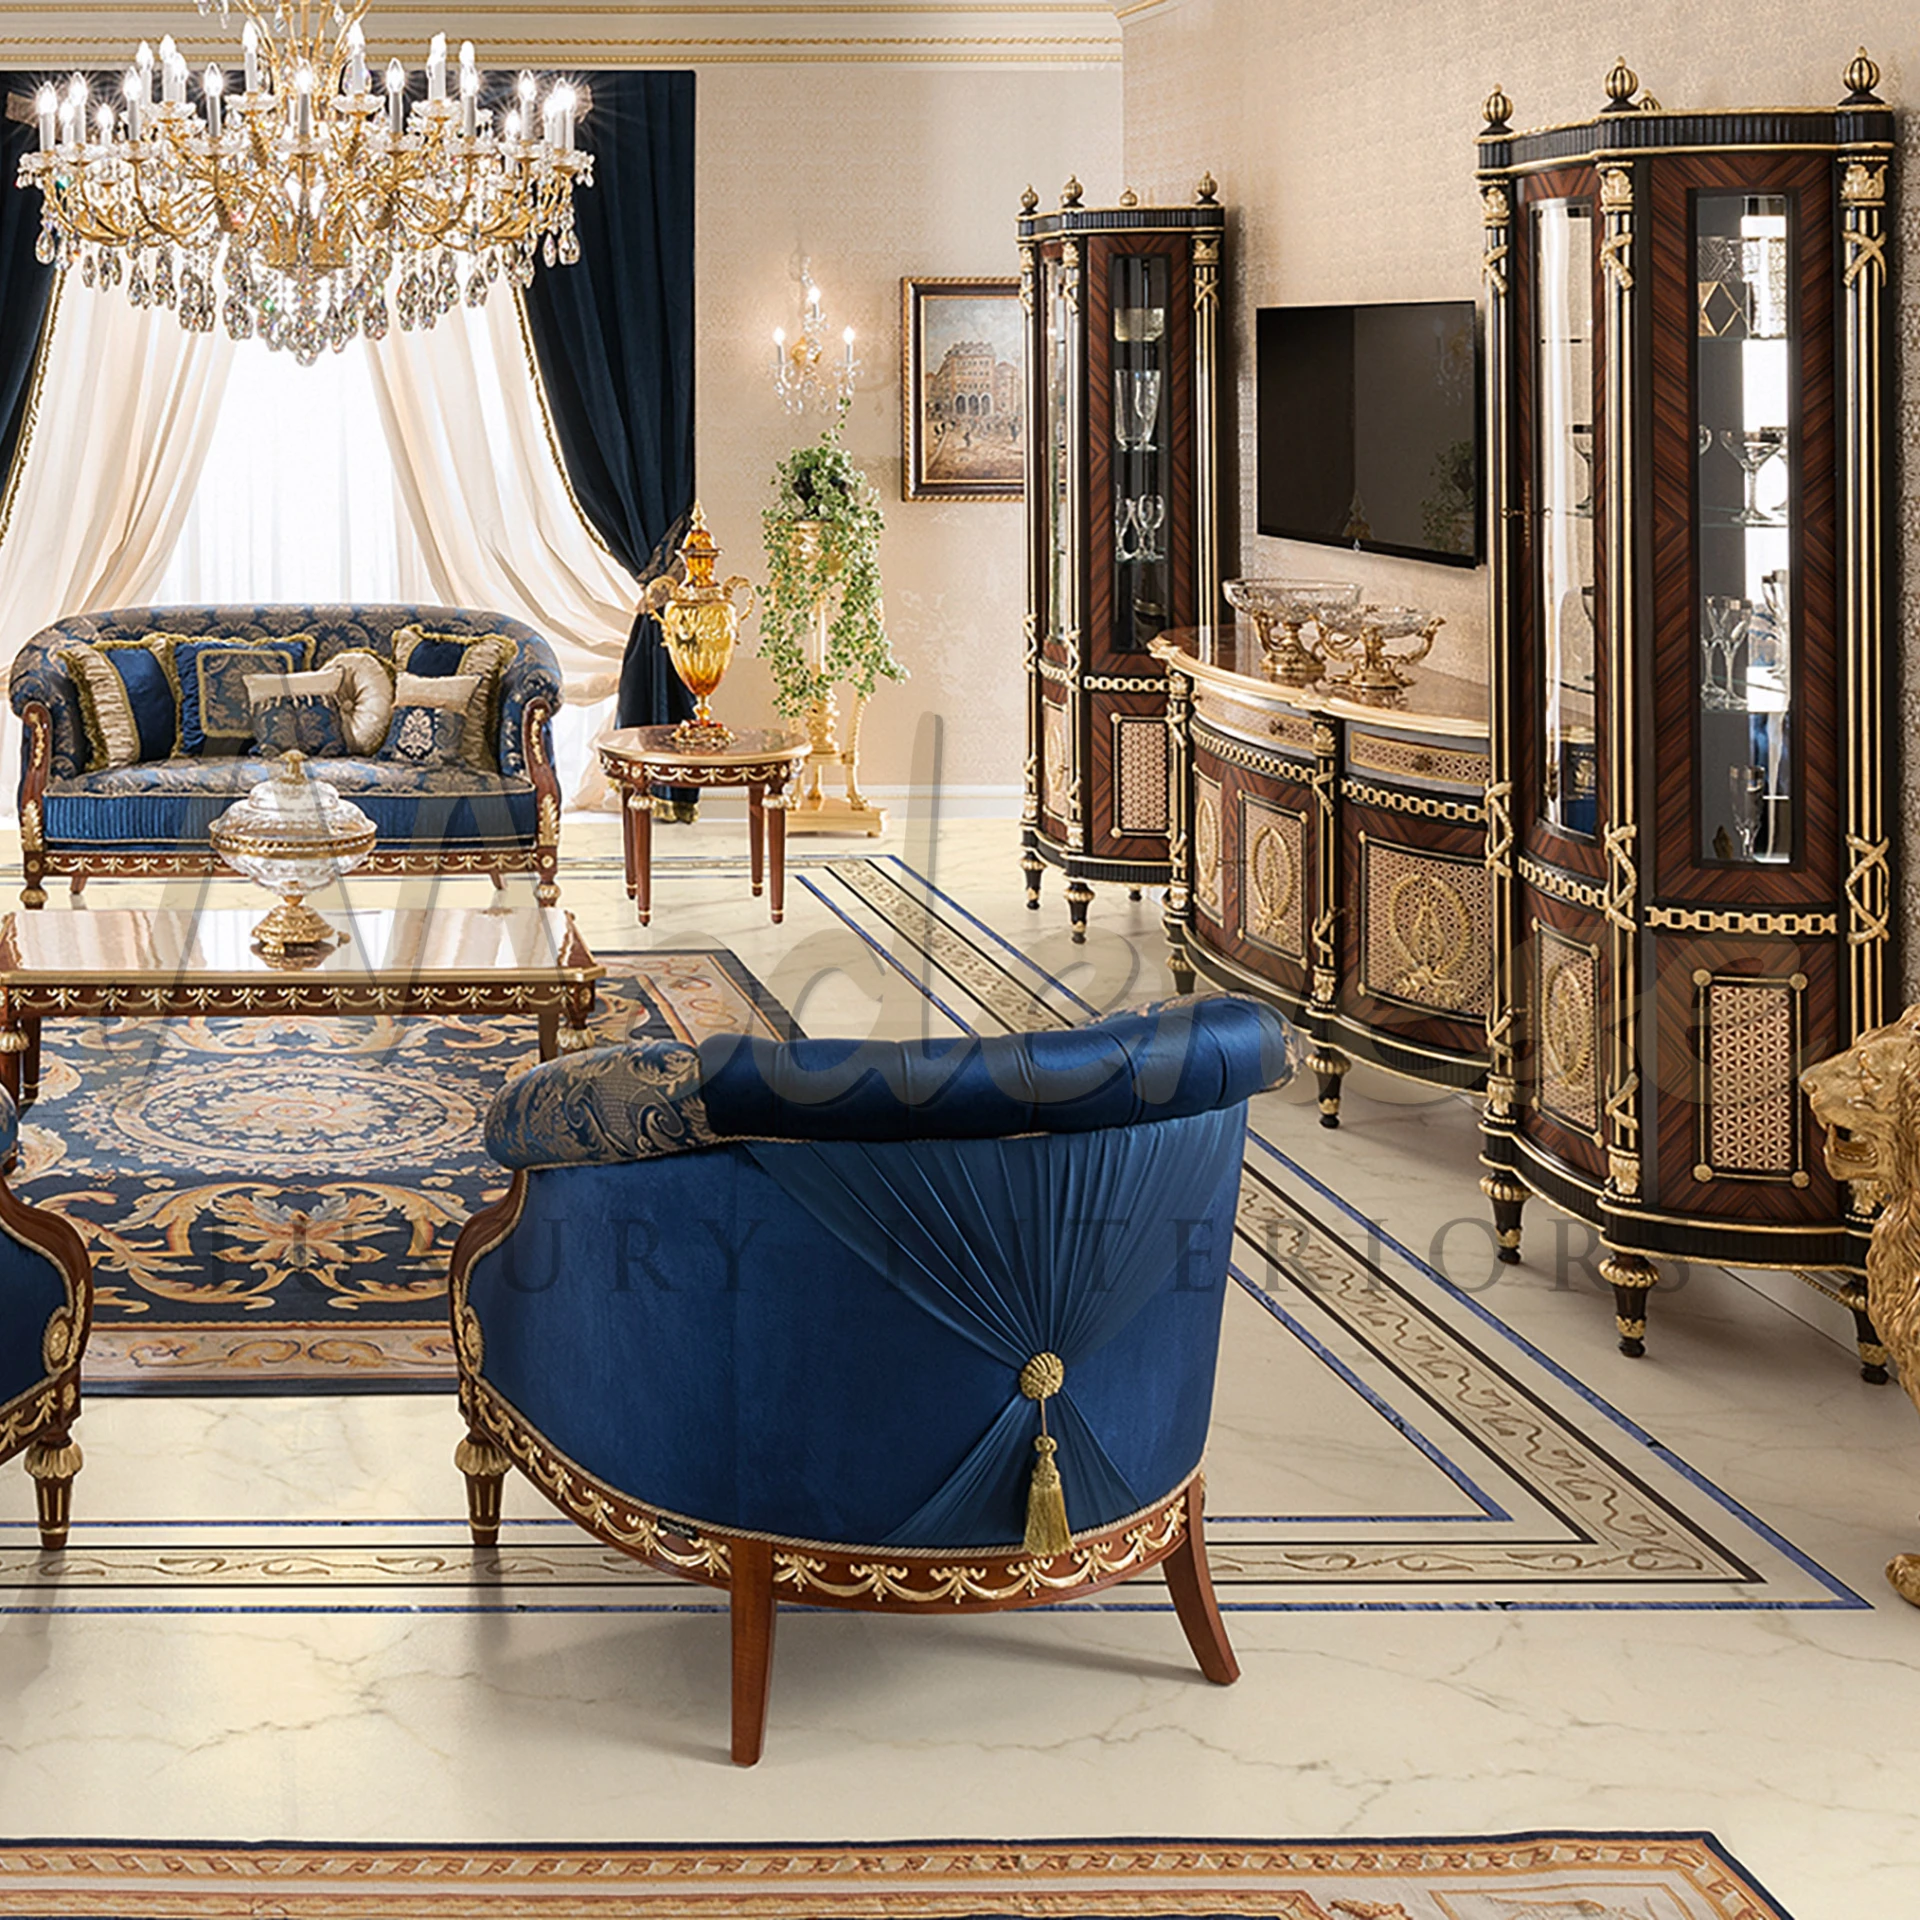 Redesign your home with Modenese Luxury Interior's luxurious furnishing. Featuring empire-style legs, golden carvings, dark columns, and transparent glass for a timeless elegance.